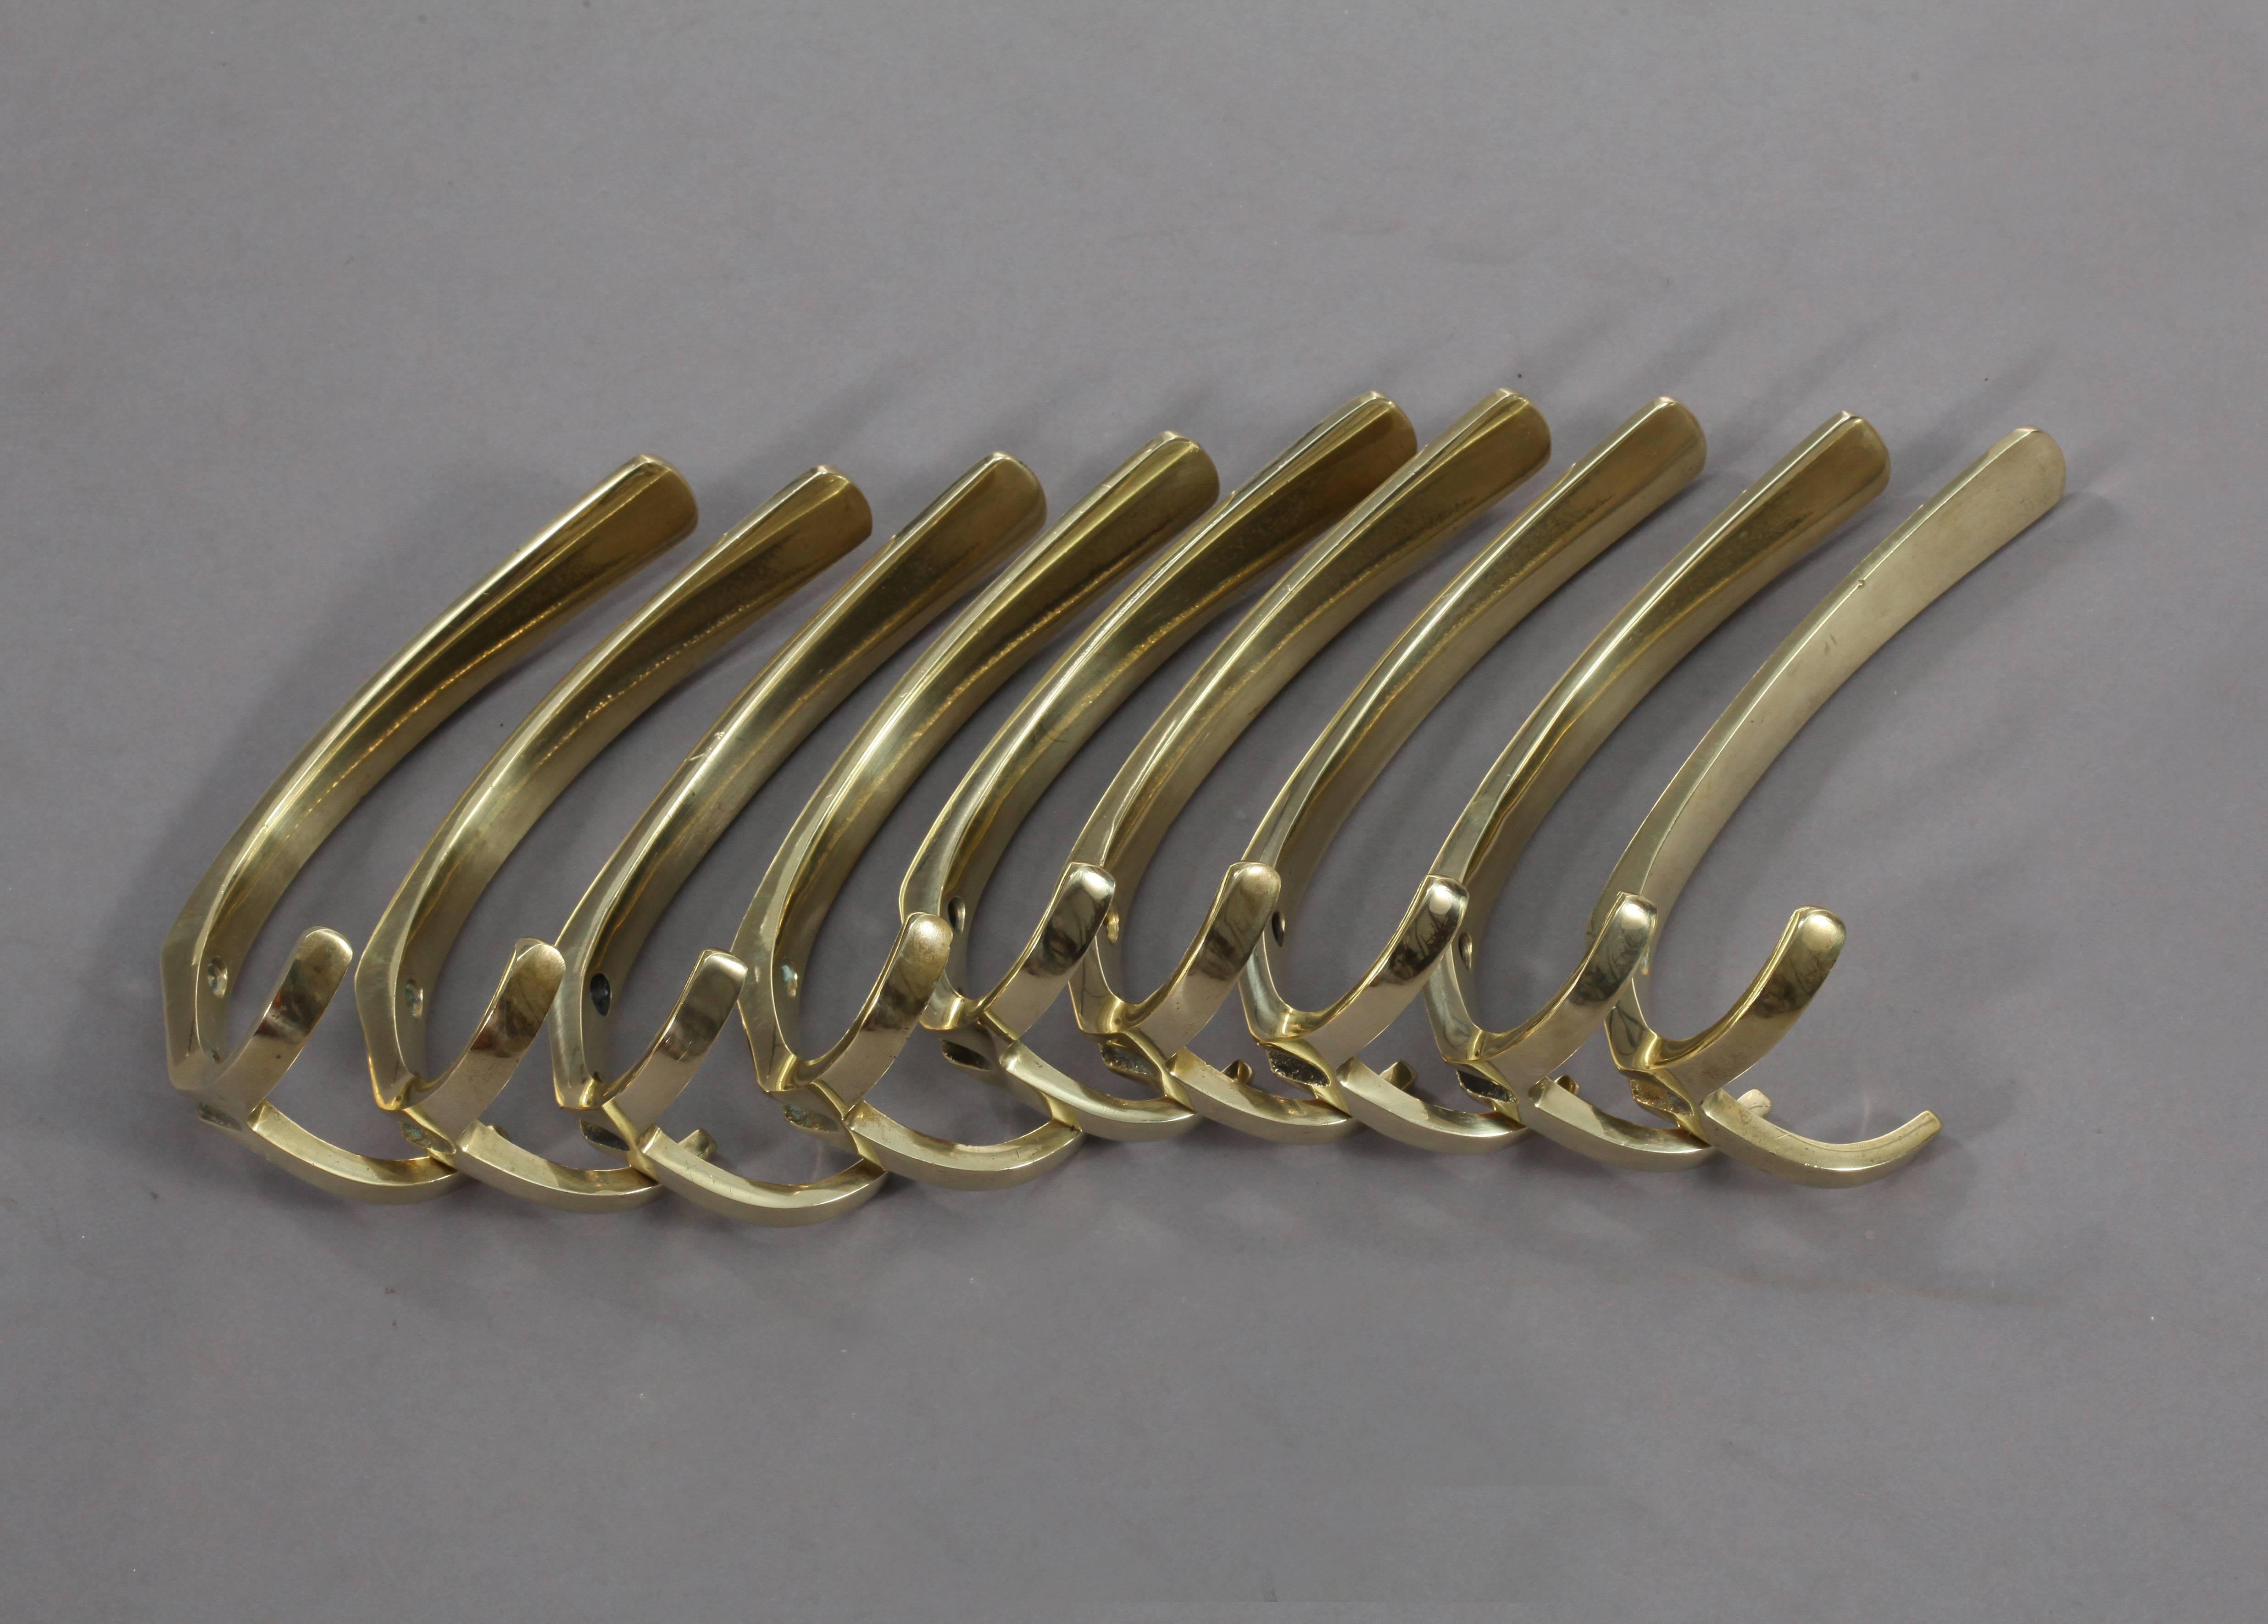 Nine simple and elegant wall-mounted brass hooks, with a contrasting faux patina. Having a large upper hook and two small lower hooks.

Designed by Carl Auböck.
Manufactured by Carl Auböck,
Vienna, 1950.
Measures: Height 6 inch (16cm), width 3